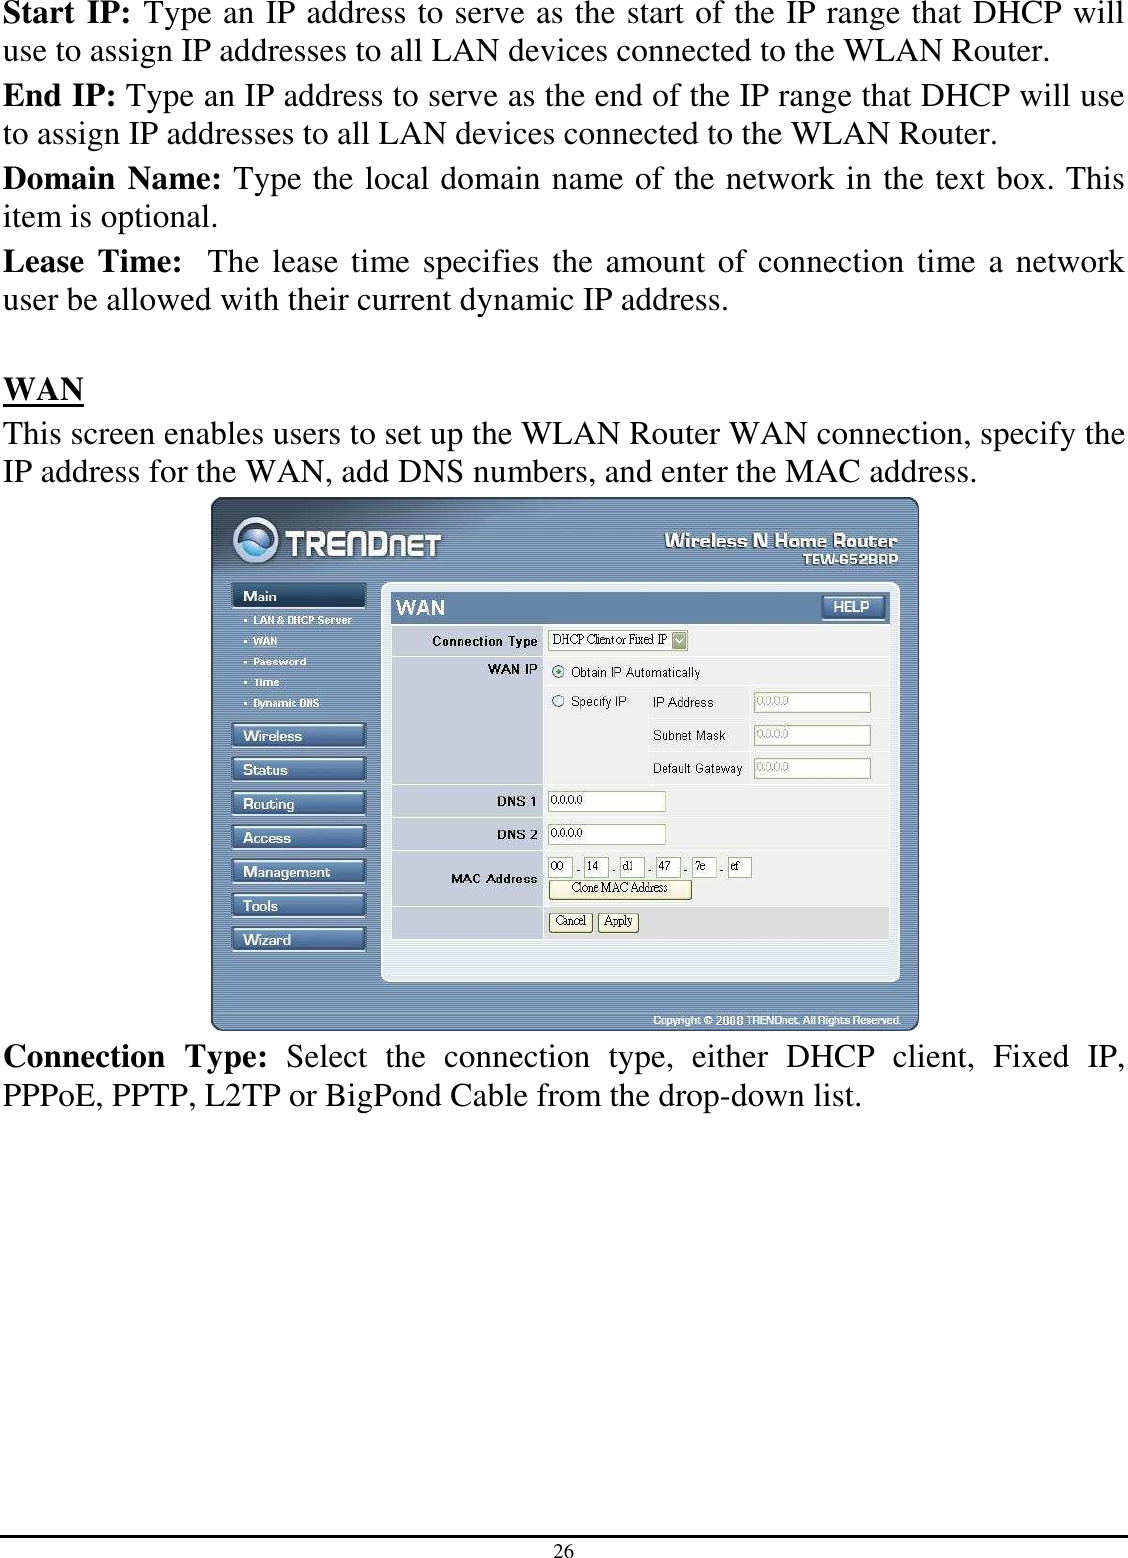 26 Start IP: Type an IP address to serve as the start of the IP range that DHCP will use to assign IP addresses to all LAN devices connected to the WLAN Router. End IP: Type an IP address to serve as the end of the IP range that DHCP will use to assign IP addresses to all LAN devices connected to the WLAN Router. Domain Name: Type the local domain name of the network in the text box. This item is optional. Lease Time:  The lease time specifies the amount of connection time a network user be allowed with their current dynamic IP address.  WAN This screen enables users to set up the WLAN Router WAN connection, specify the IP address for the WAN, add DNS numbers, and enter the MAC address.  Connection  Type:  Select  the  connection  type,  either  DHCP  client,  Fixed  IP, PPPoE, PPTP, L2TP or BigPond Cable from the drop-down list. 